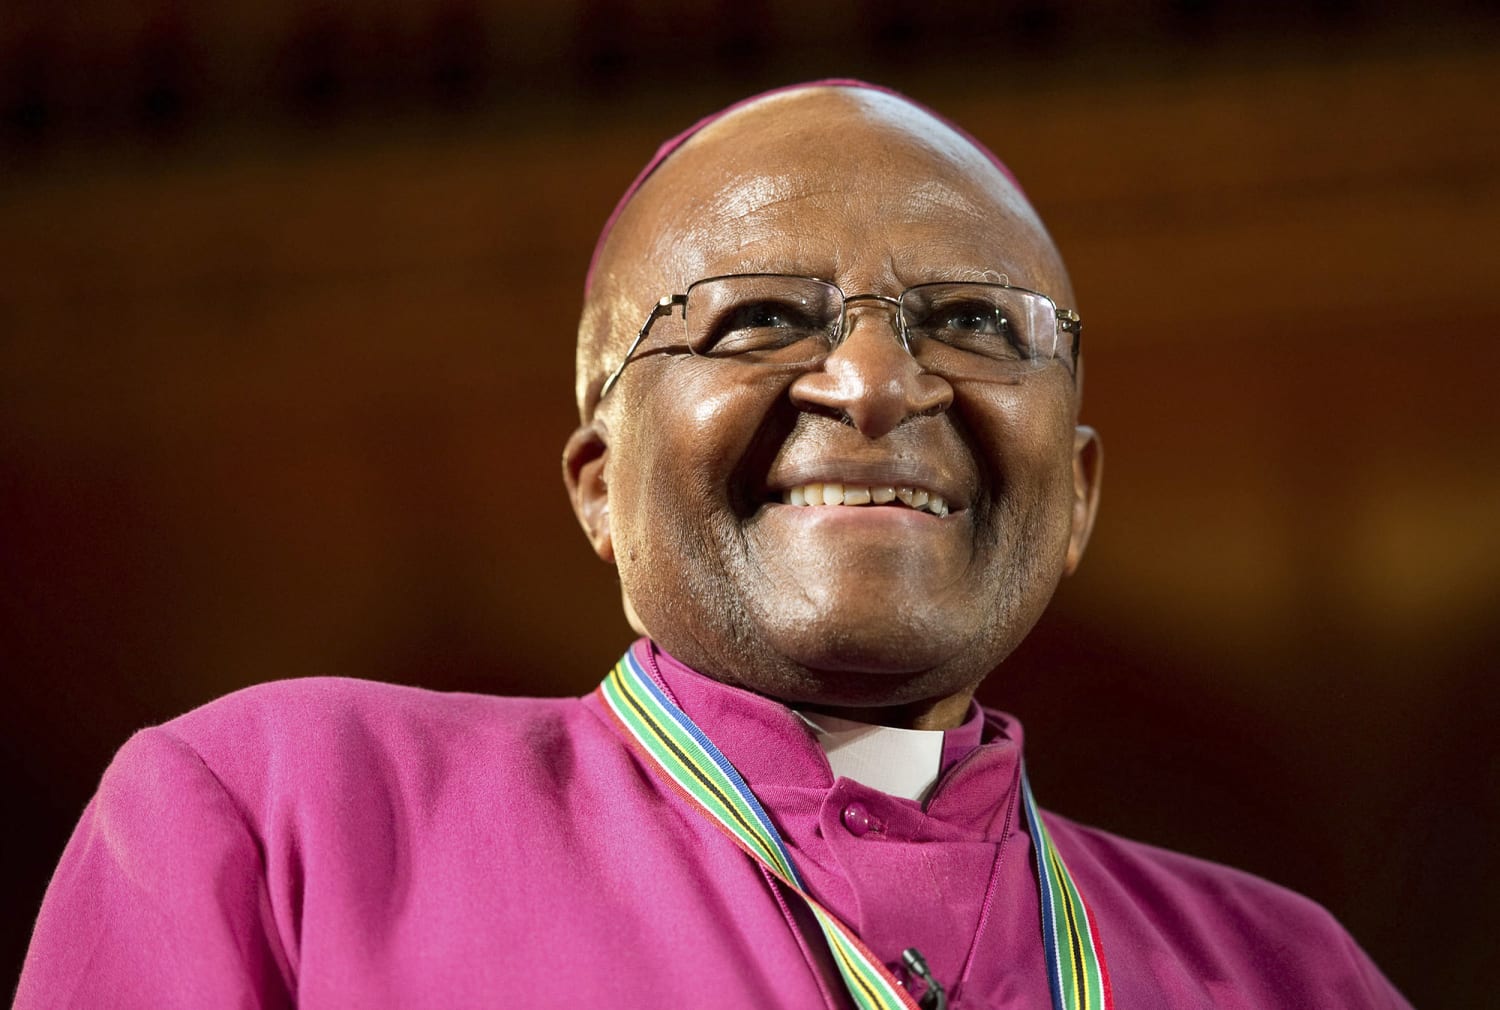 ‘Moral compass’: South Africa’s anti-apartheid hero Tutu praised at state funeral